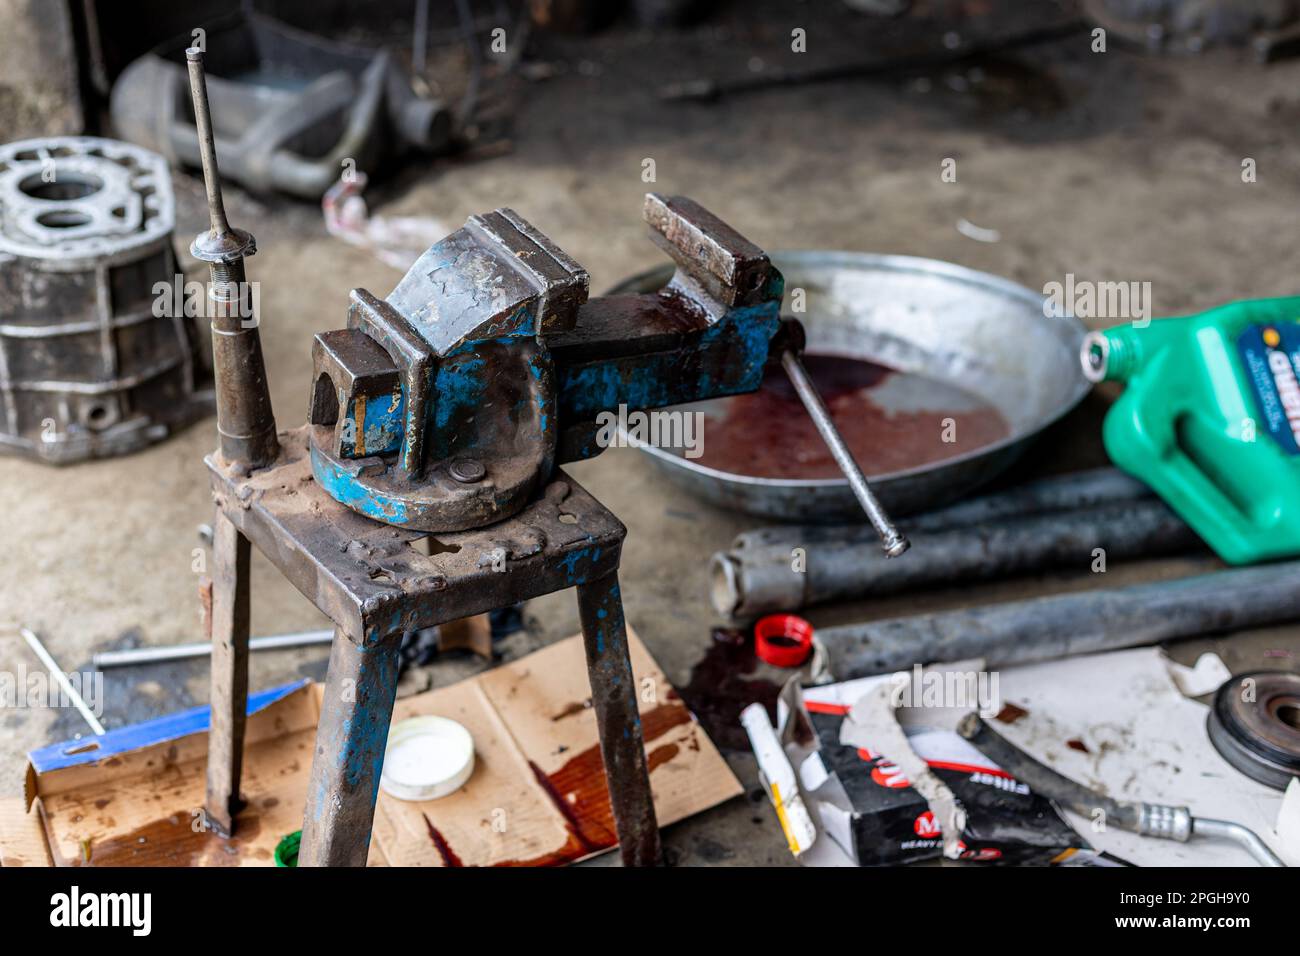 Automobile mechanic workshop with tools Stock Photo